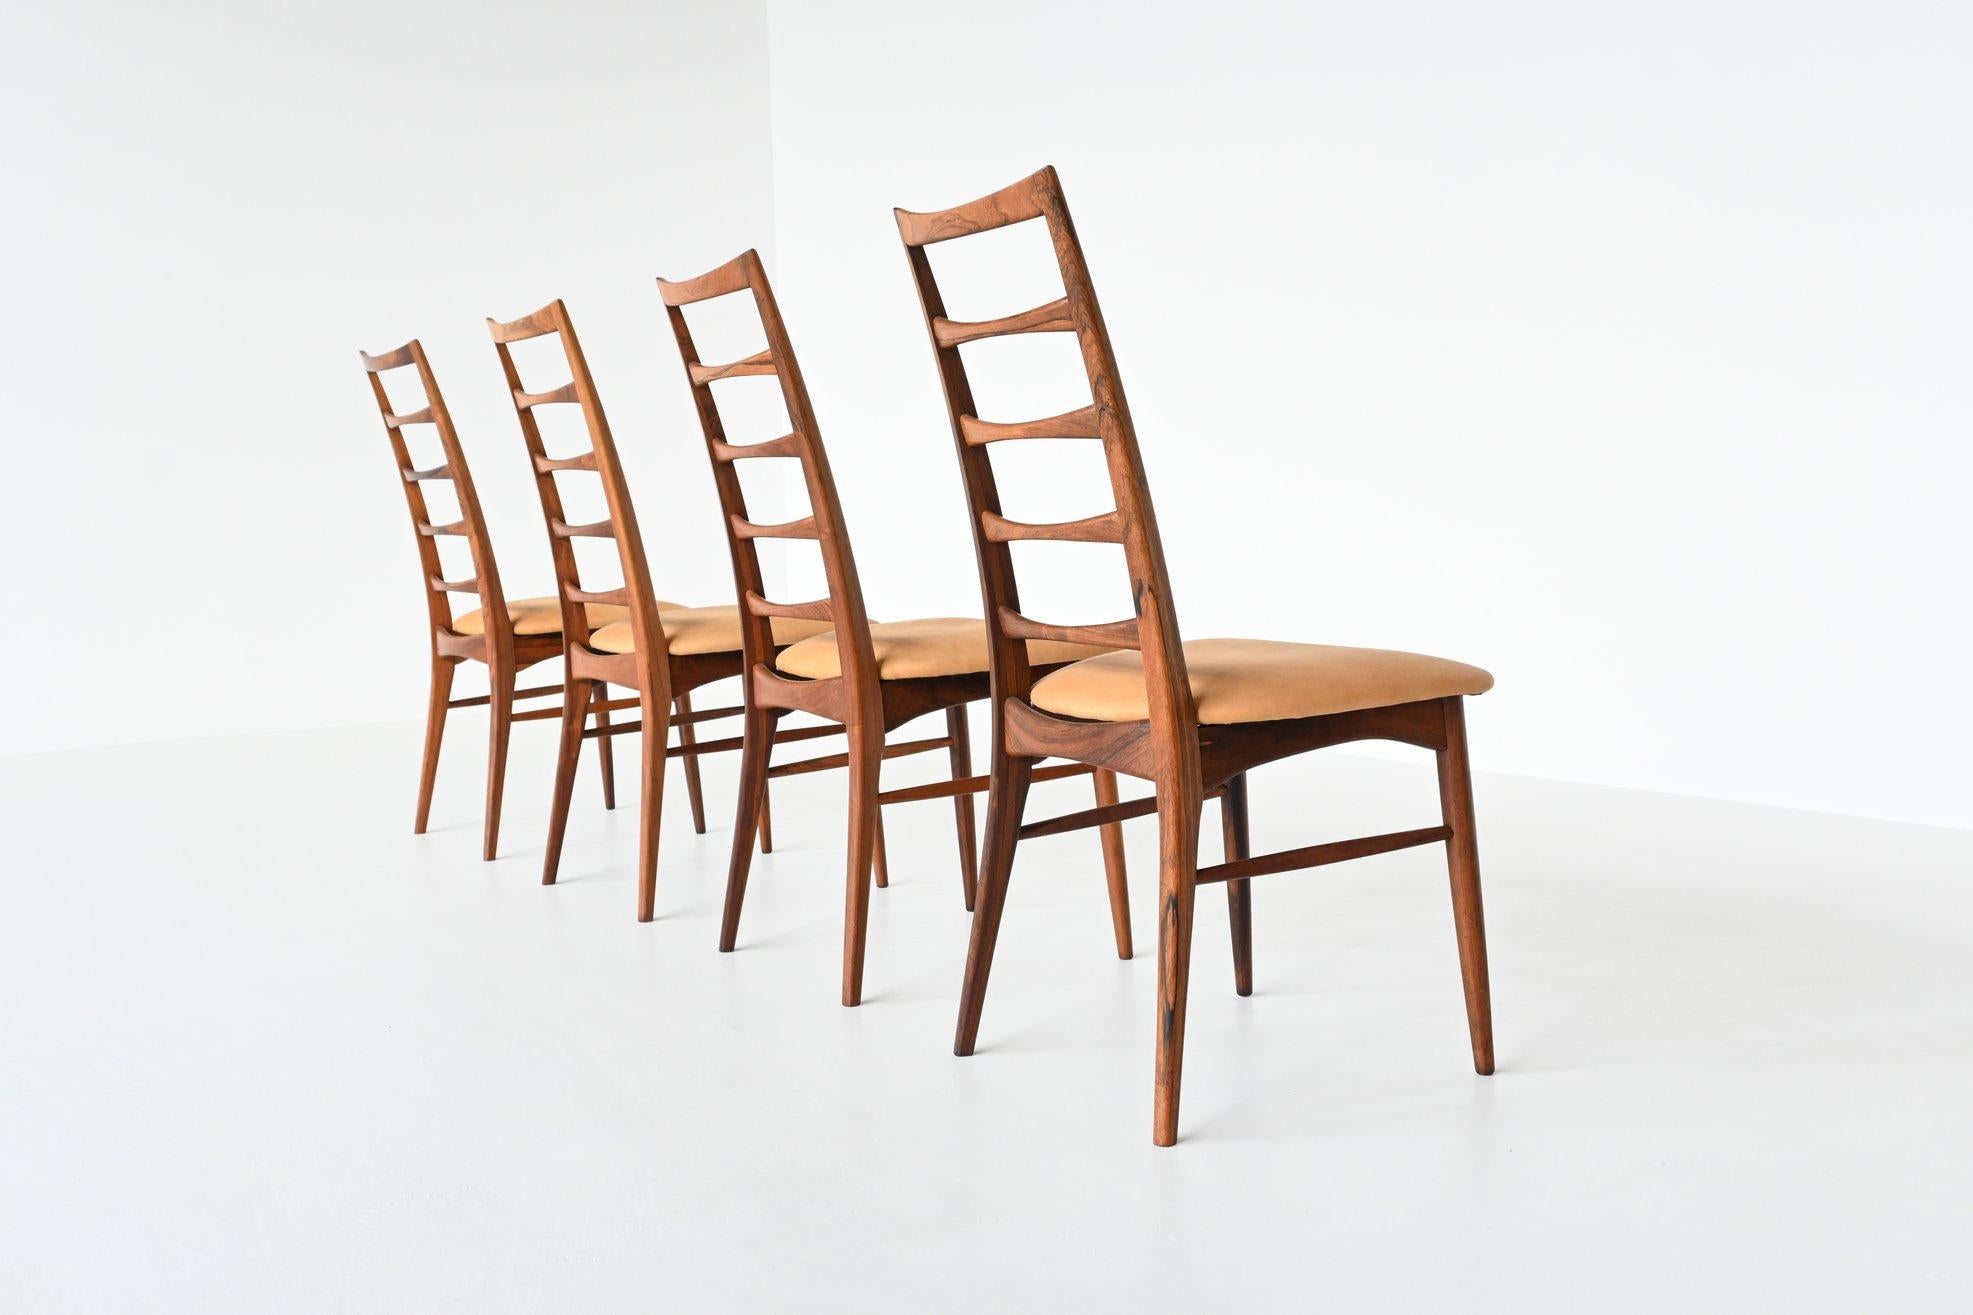 Beautiful shaped set of four dining chairs designed by Niels Koefoed and manufactured by Koefoeds Mobelfabrik A/S, Denmark 1961. These chairs are made of amazing grained solid rosewood and are reupholstered with an high quality natural camel colored